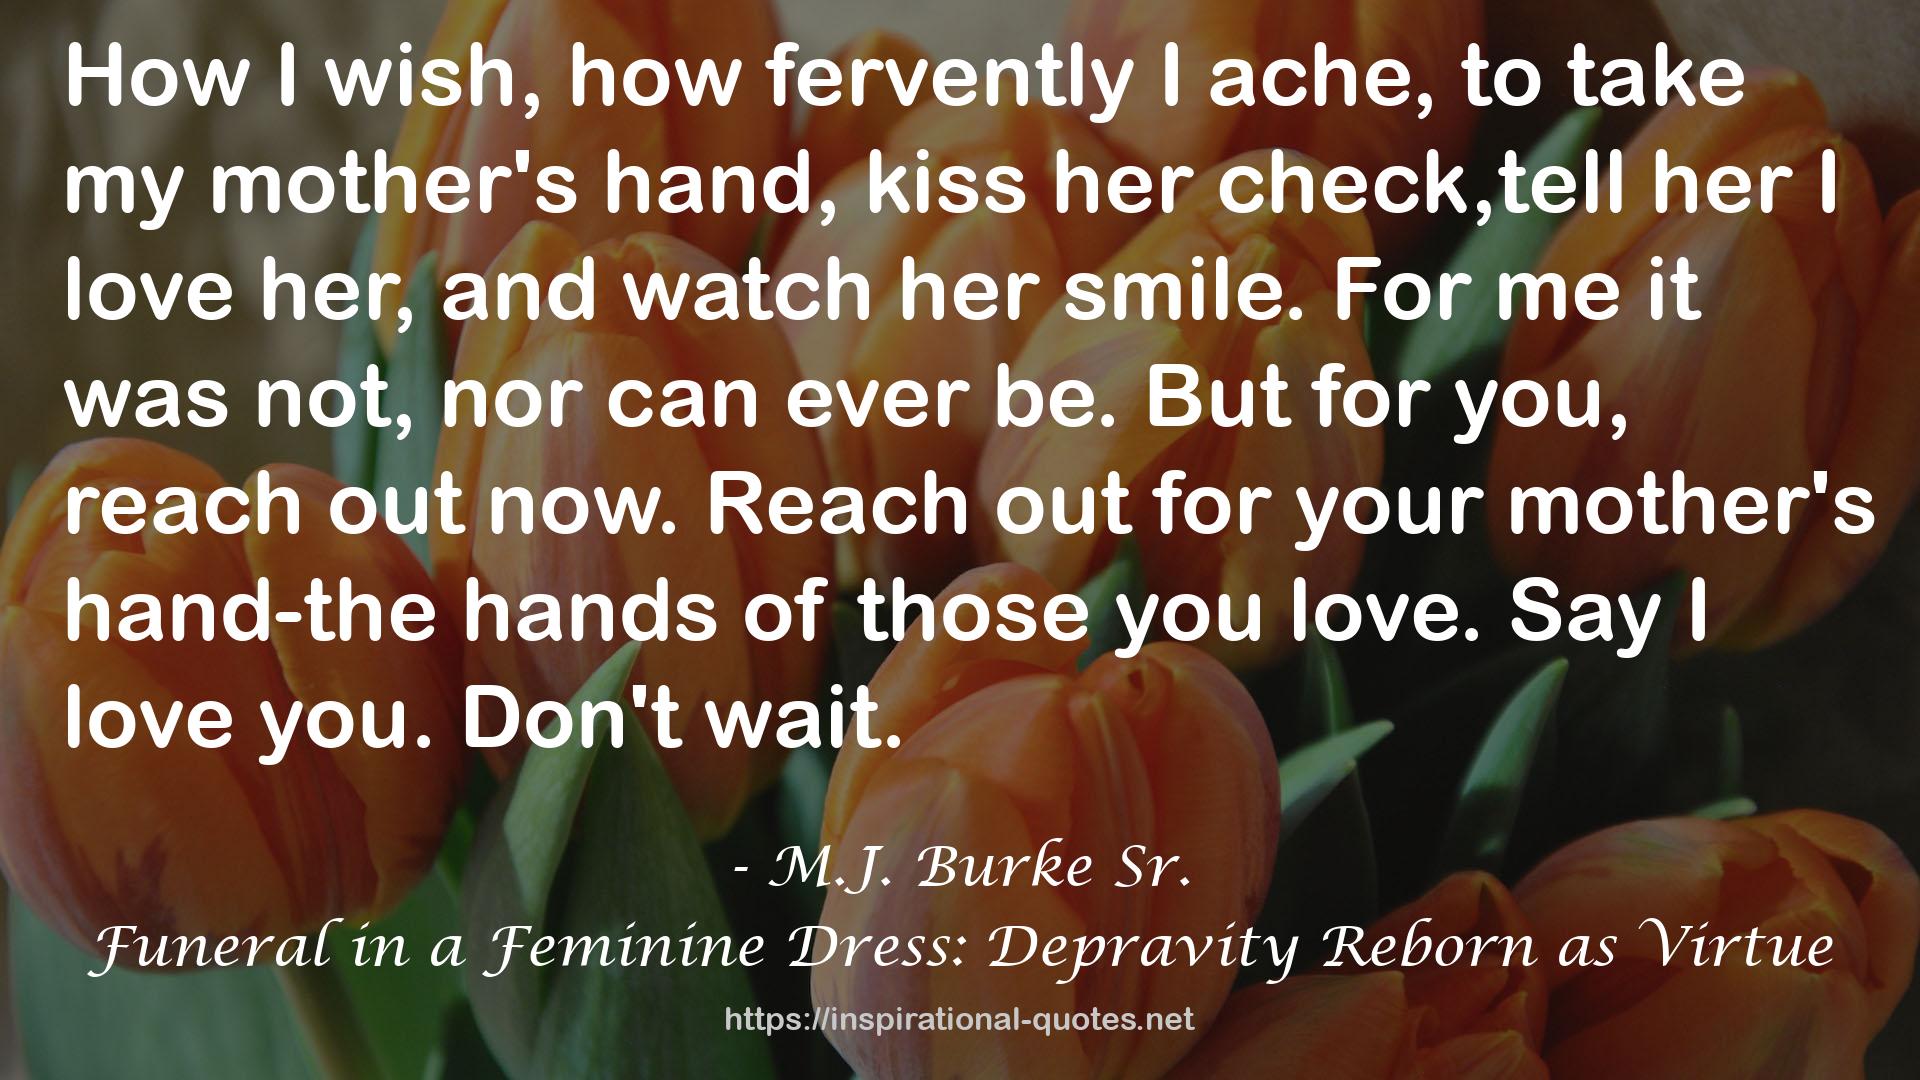 Funeral in a Feminine Dress: Depravity Reborn as Virtue QUOTES